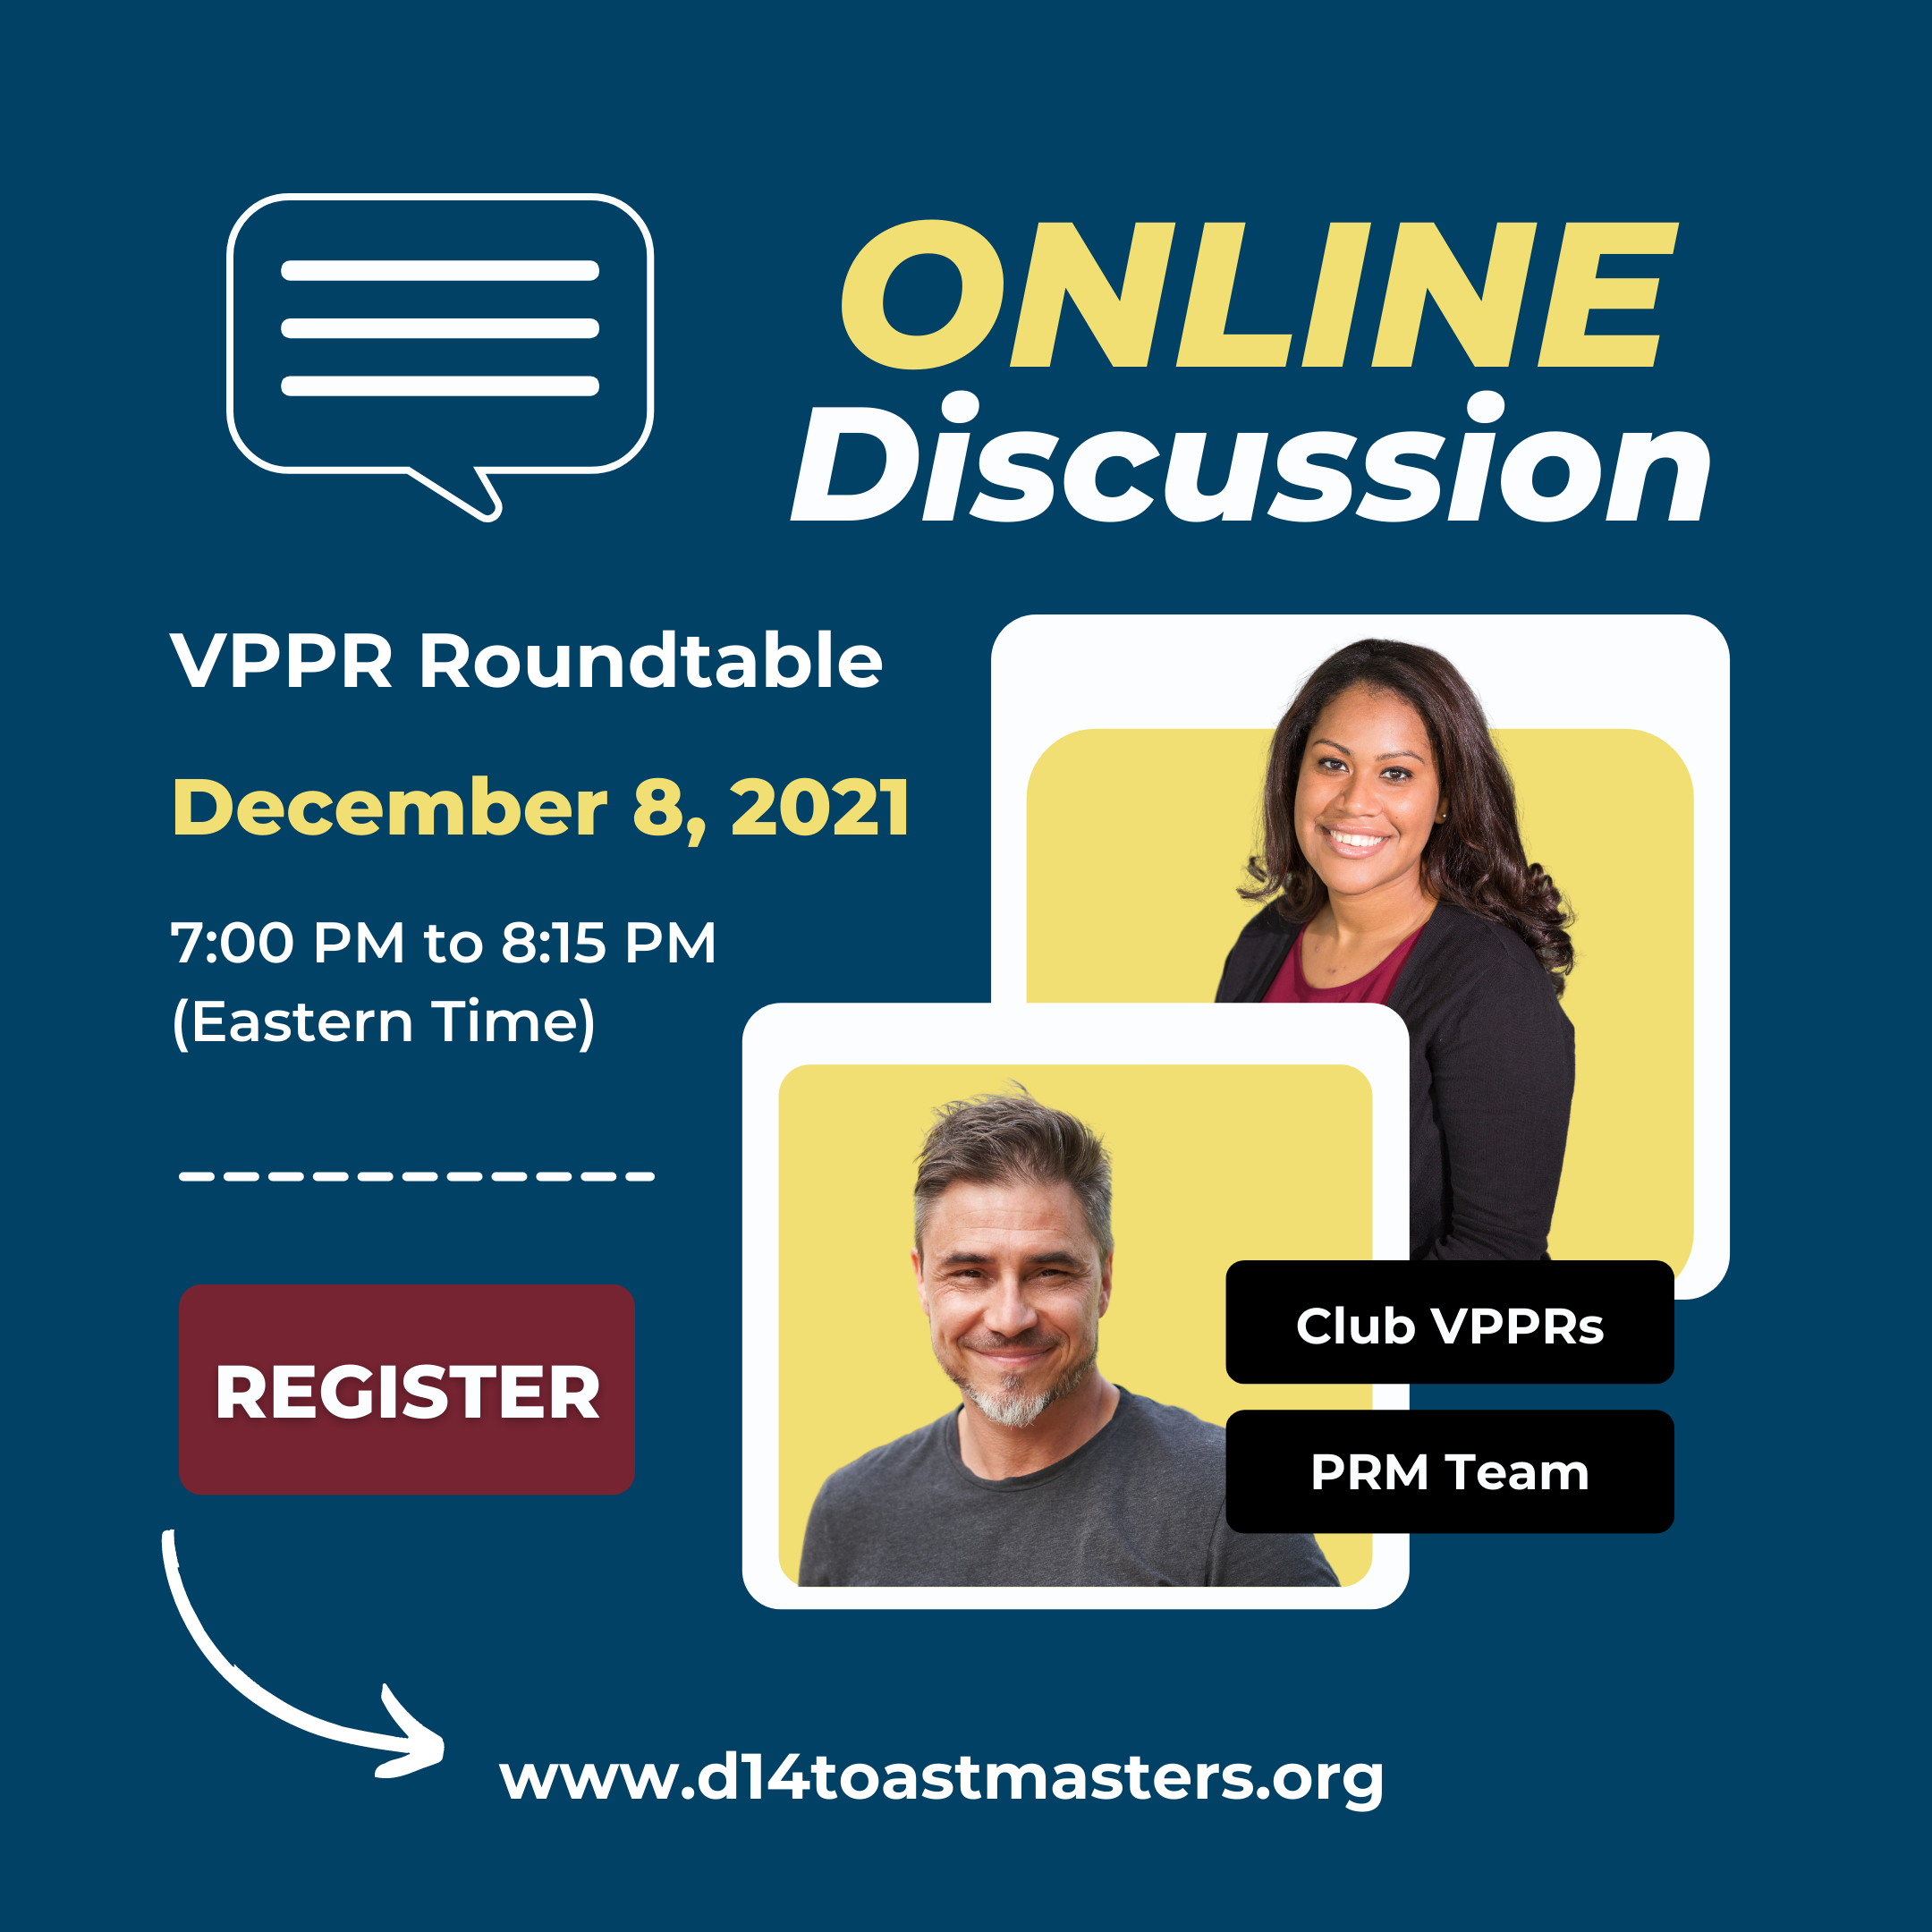 VPPR Roundtable Discussion on December 8, 2021